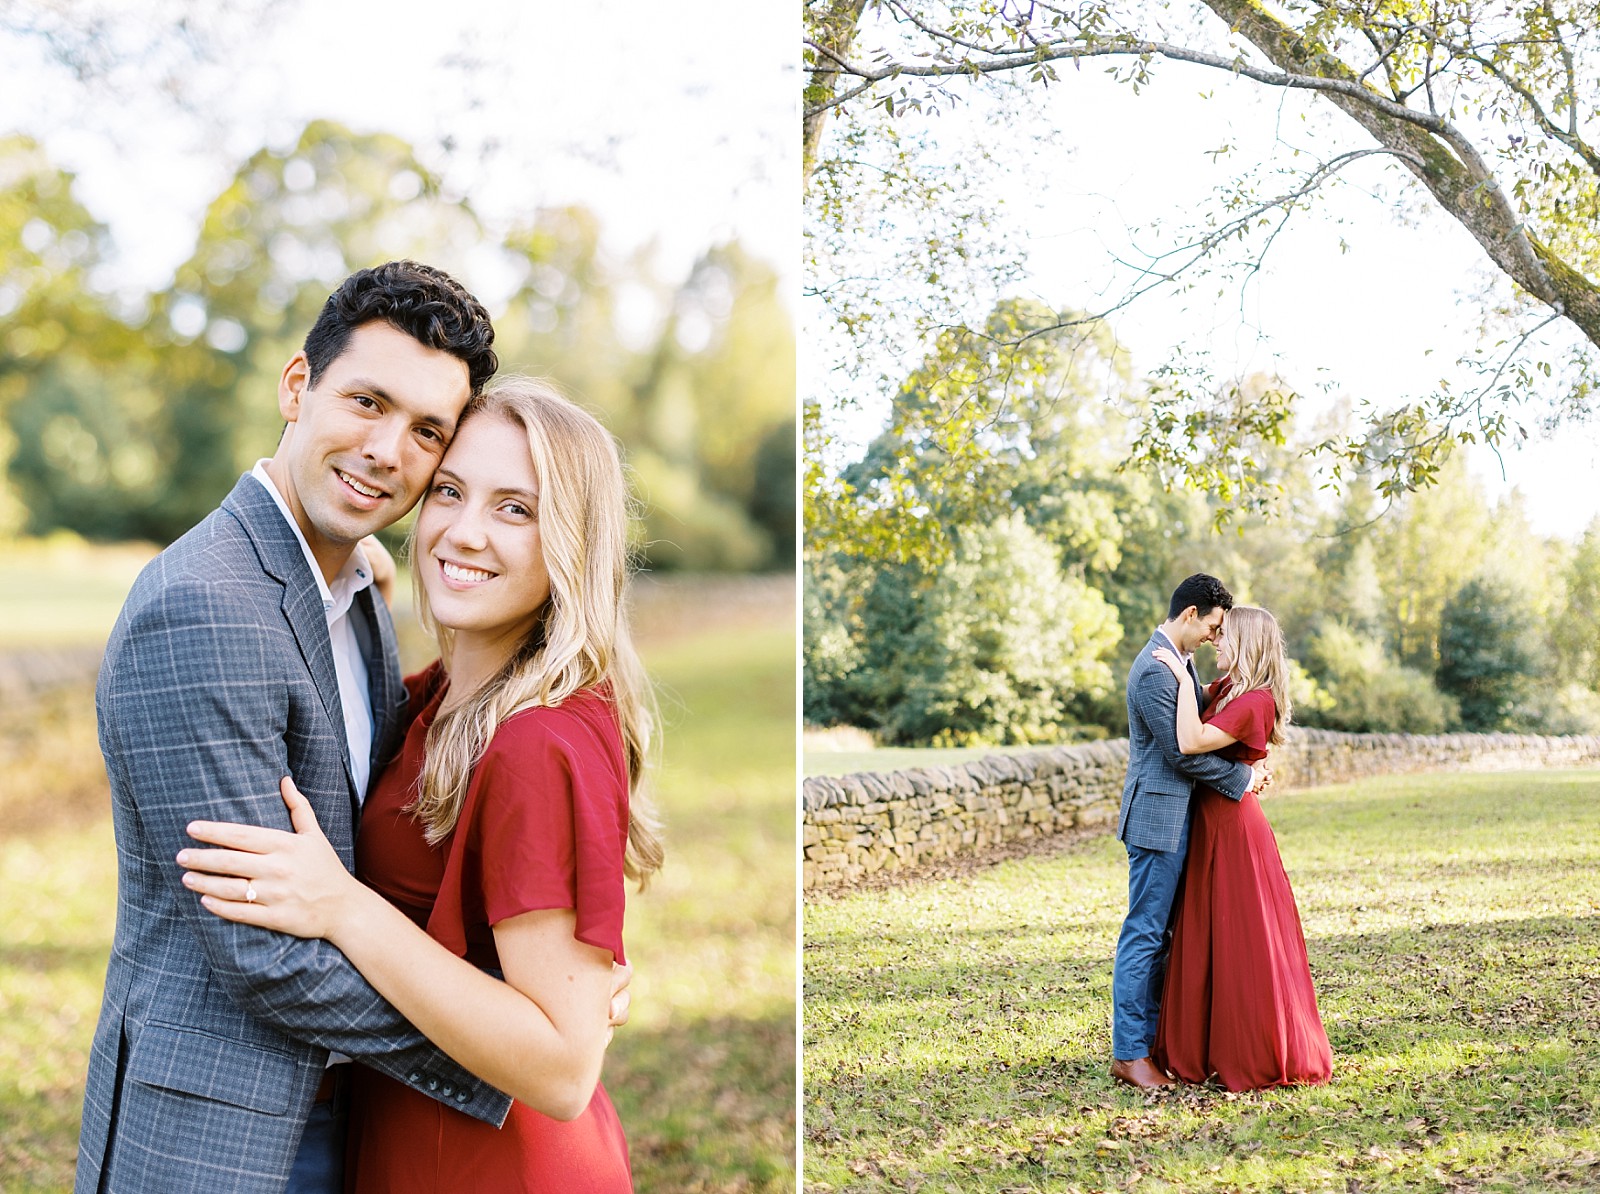 Fall engagement photo outfit inspo  | Raleigh NC wedding photographer